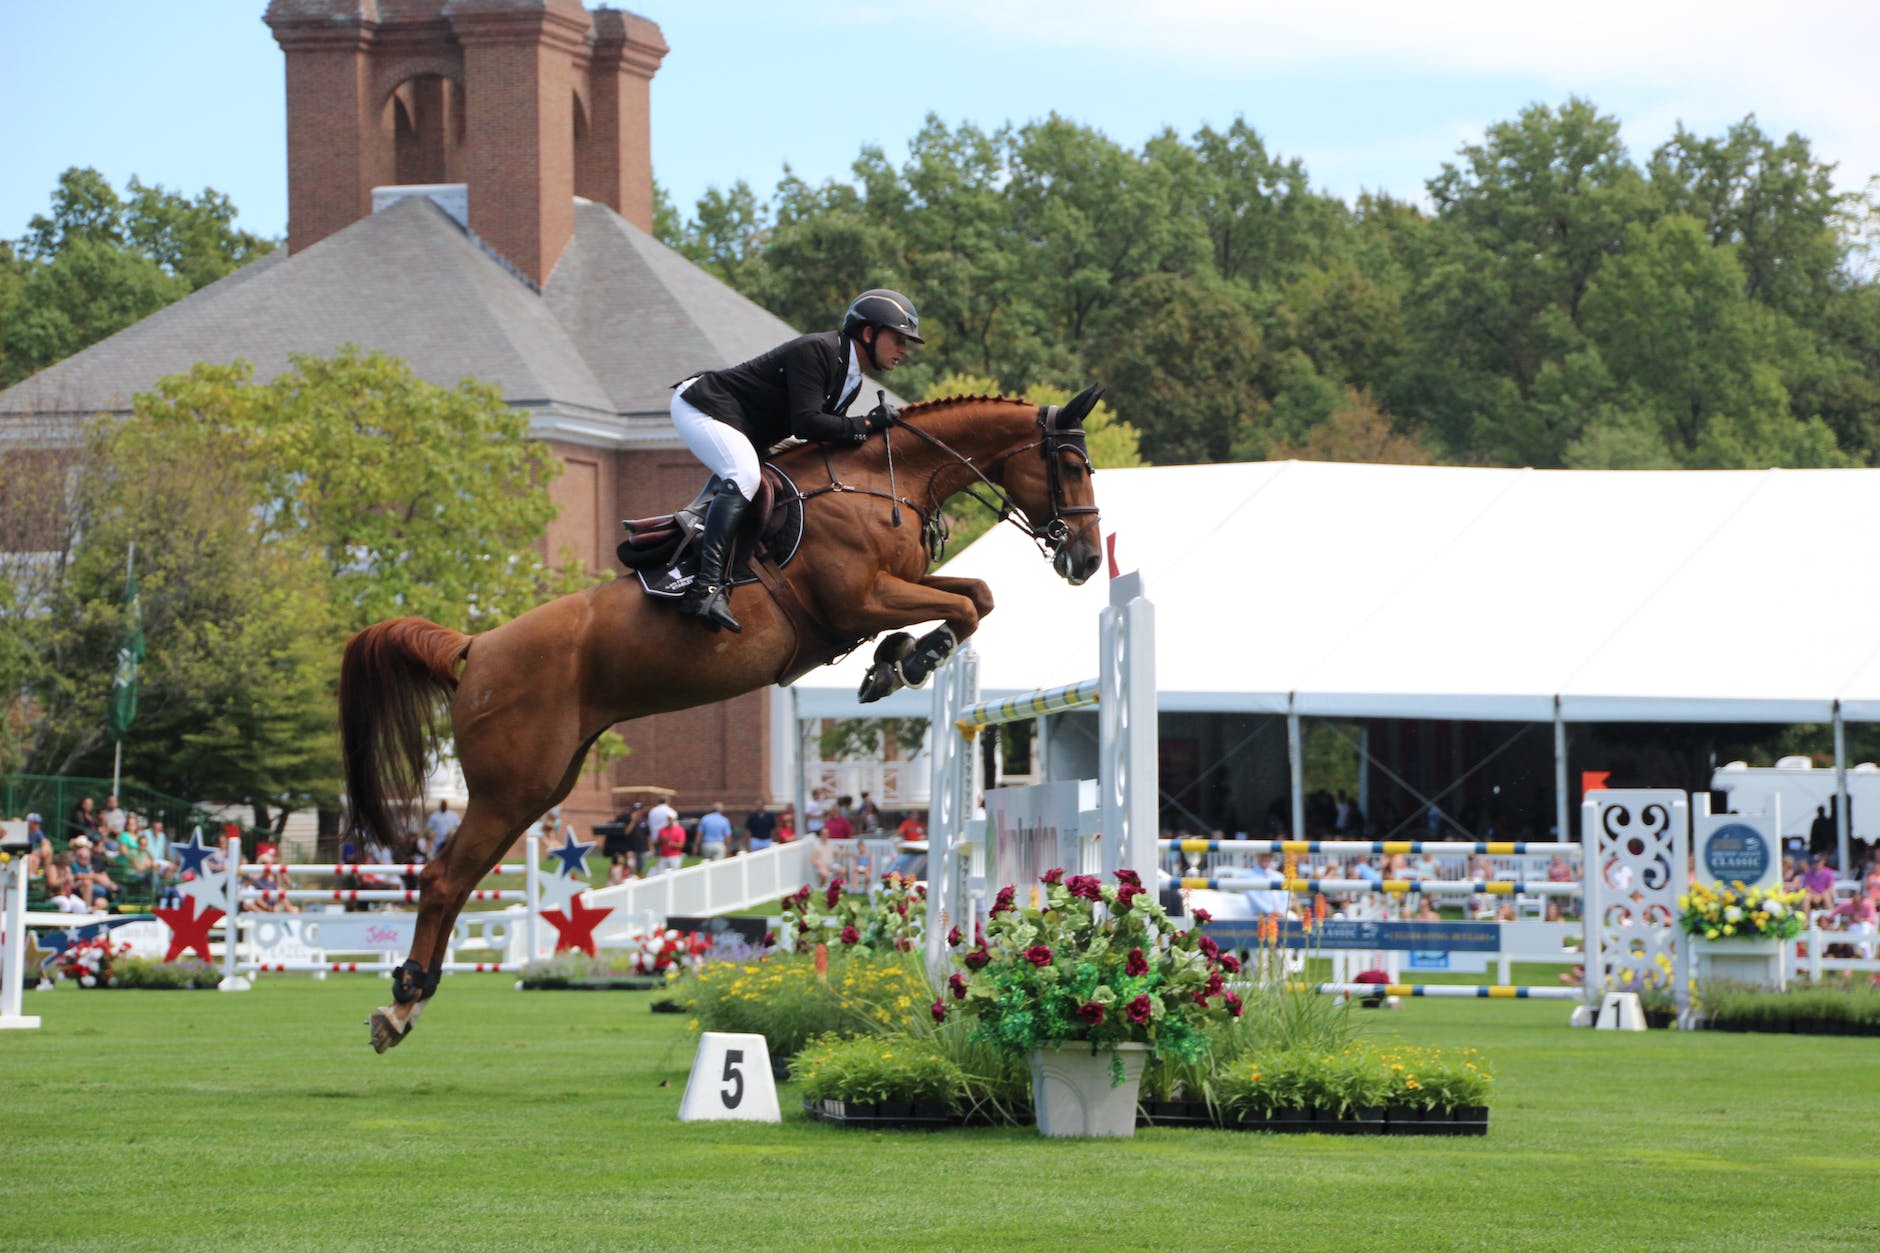 an equestrian jumping a horse over an oxer